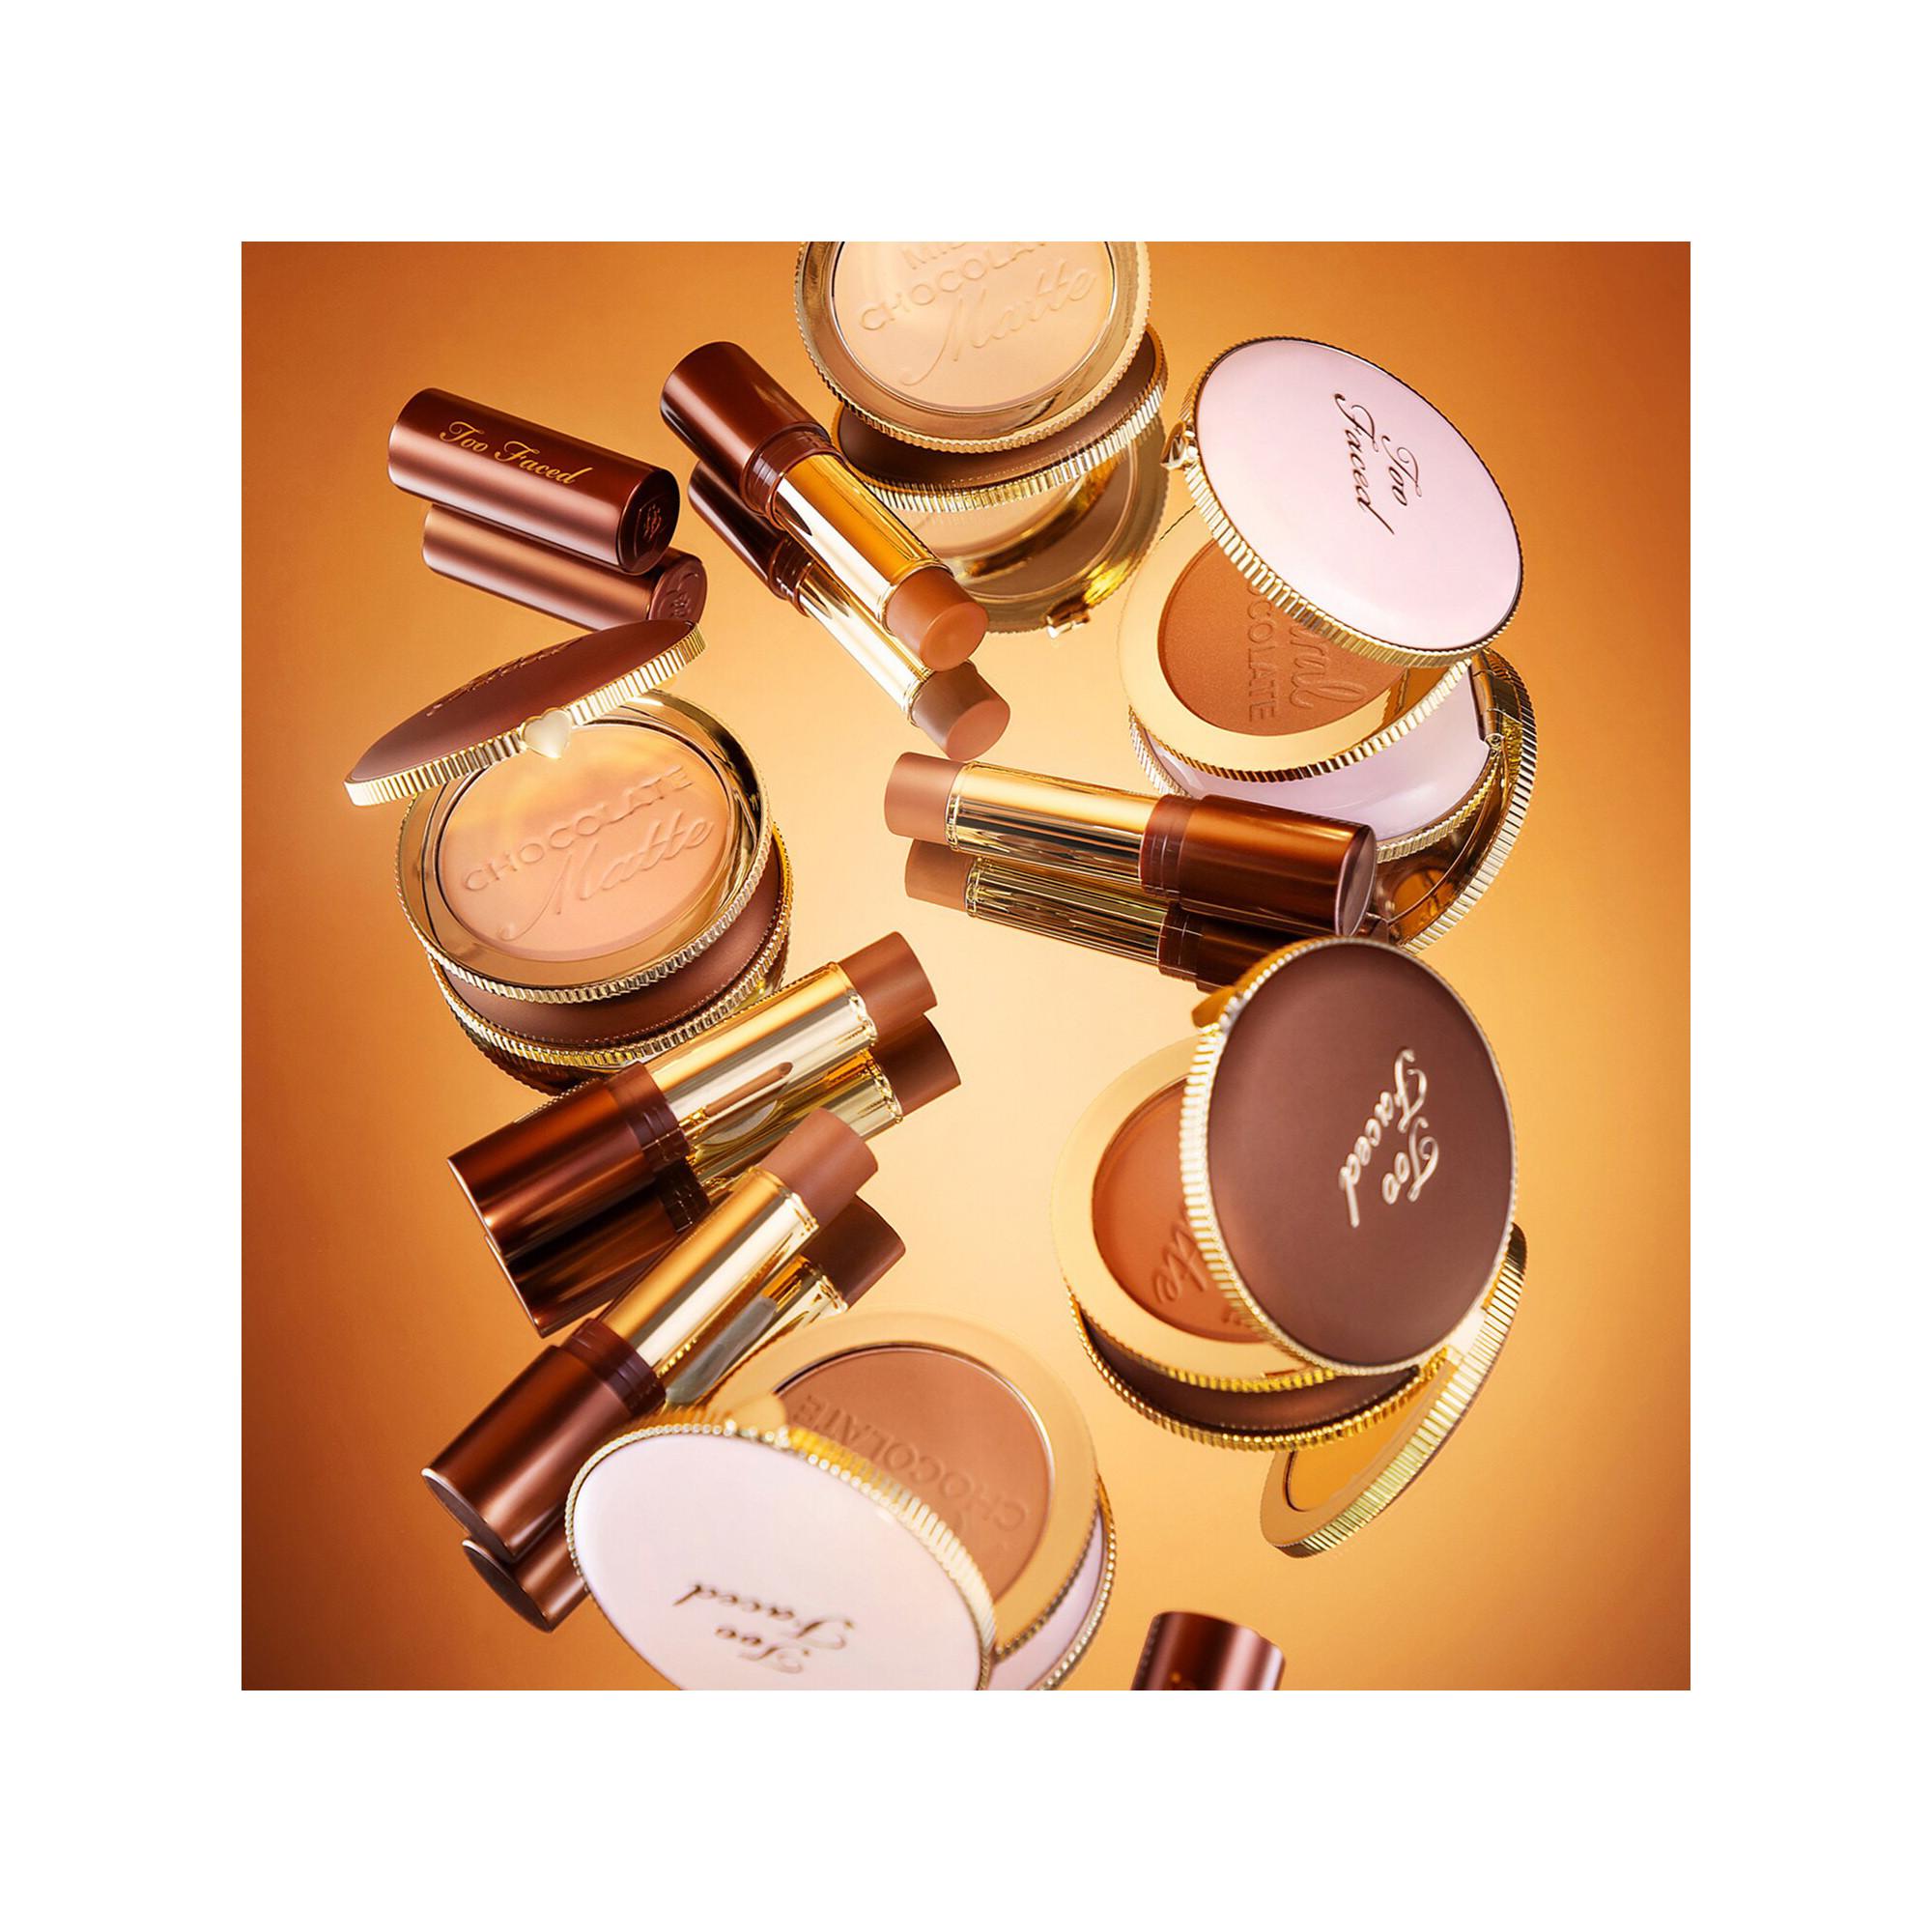 Too Faced  Chocolate Soleil Stick Crémeux - Stick bronzer effetto scolpito 